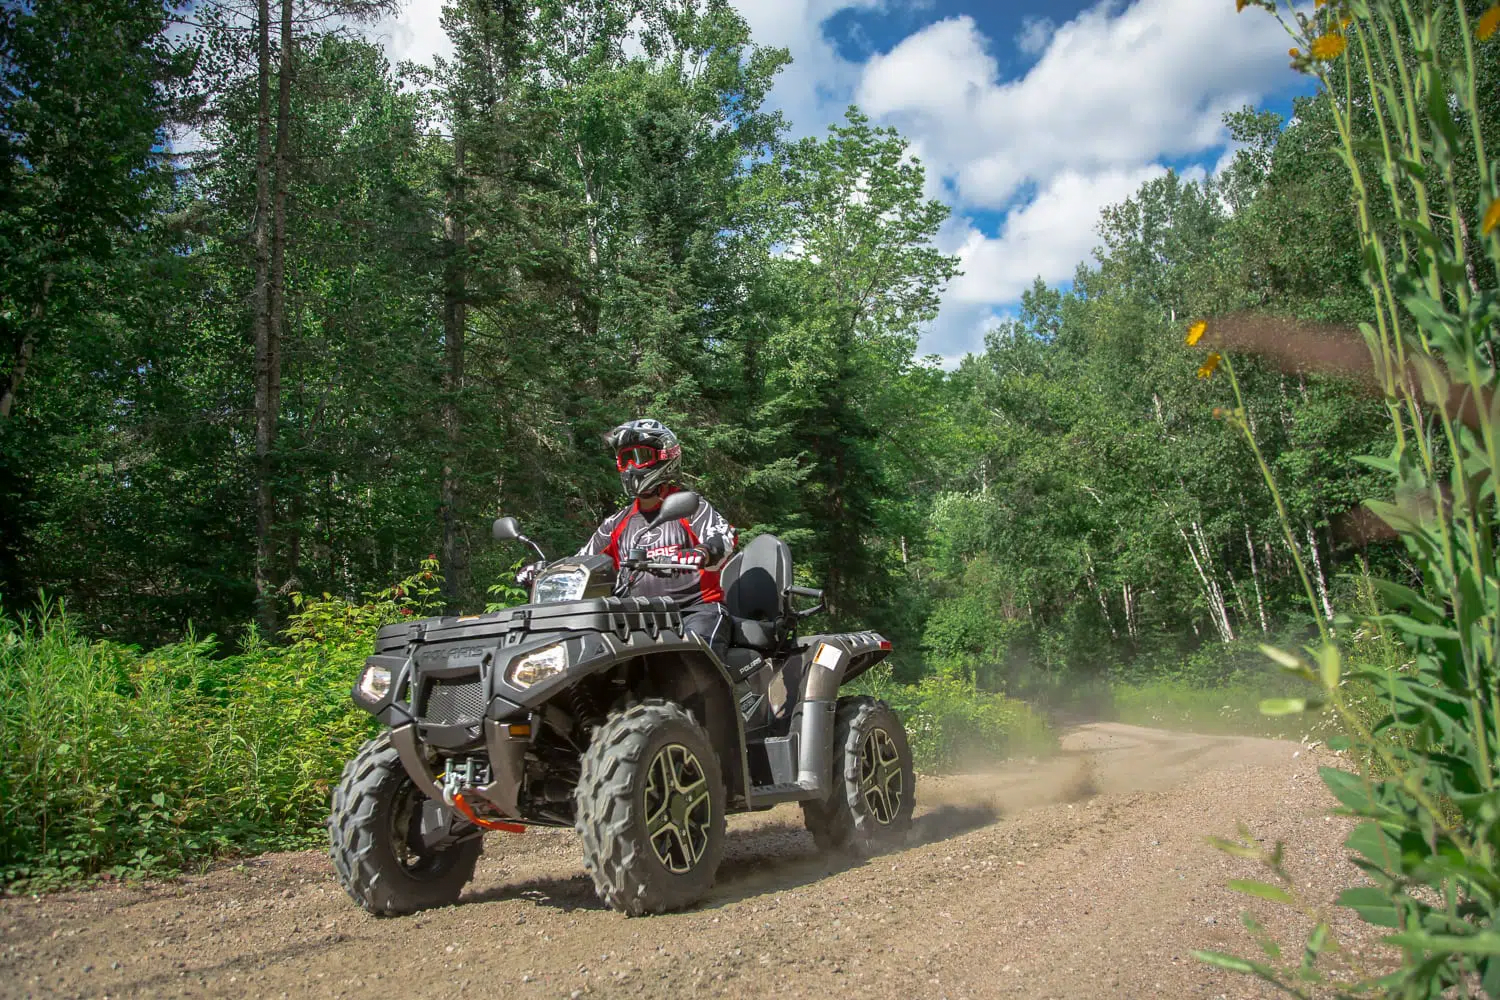 https://recreationalpowersports.com/wp-content/uploads/2022/11/The-Health-Benefits-of-ATV-Riding-6-of-12.png